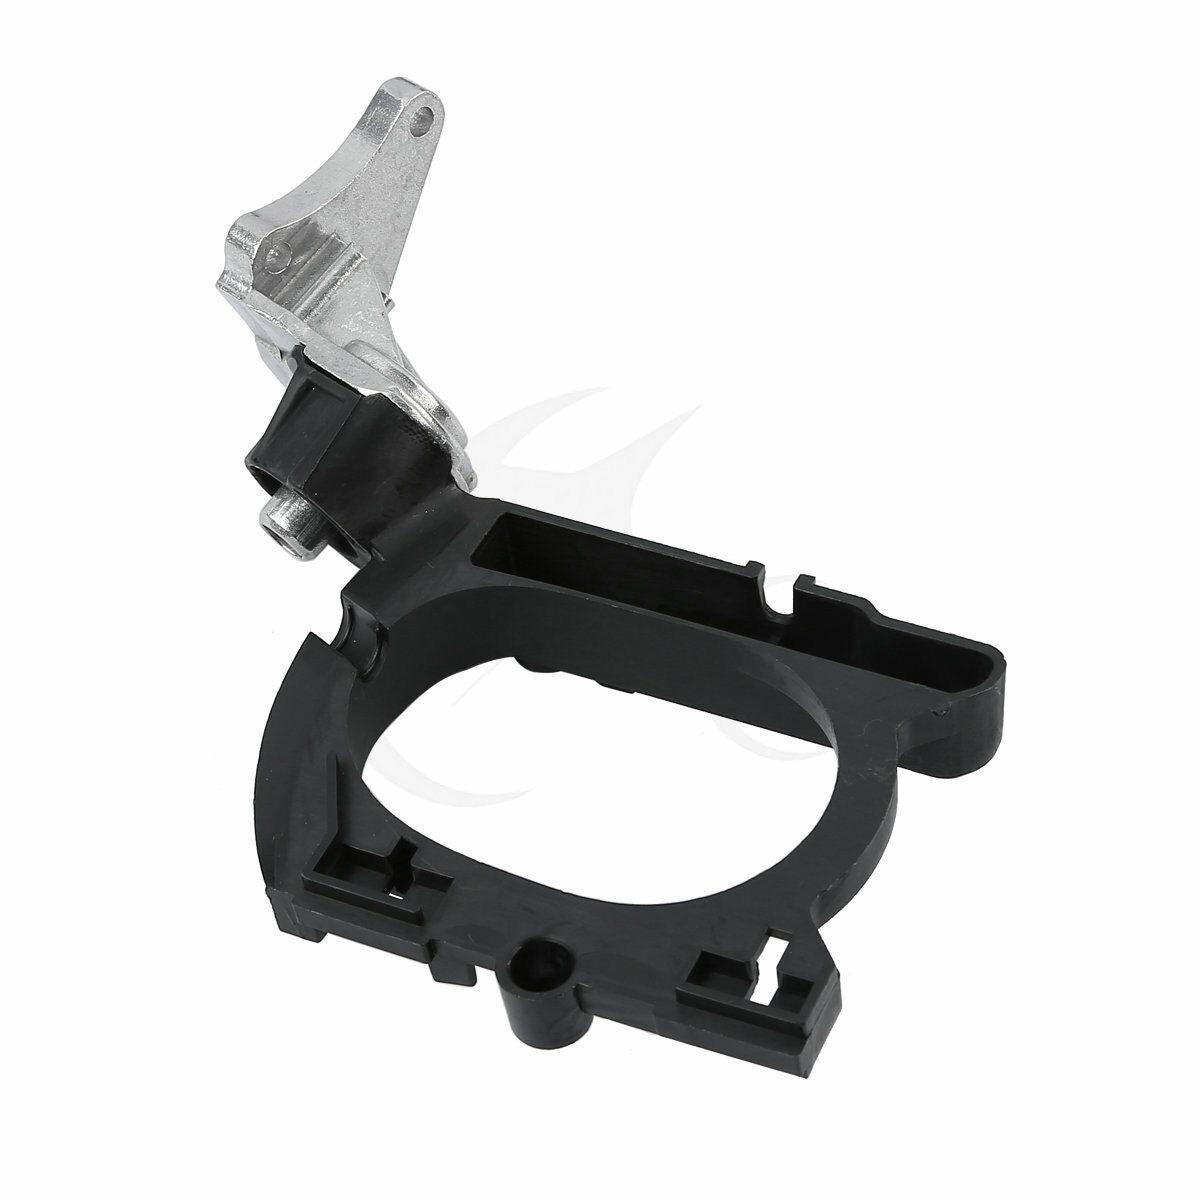 Left Rear View Mirror Mount Bracket Fit Honda Goldwing GL1800 2001-2013 2012 New - Moto Life Products